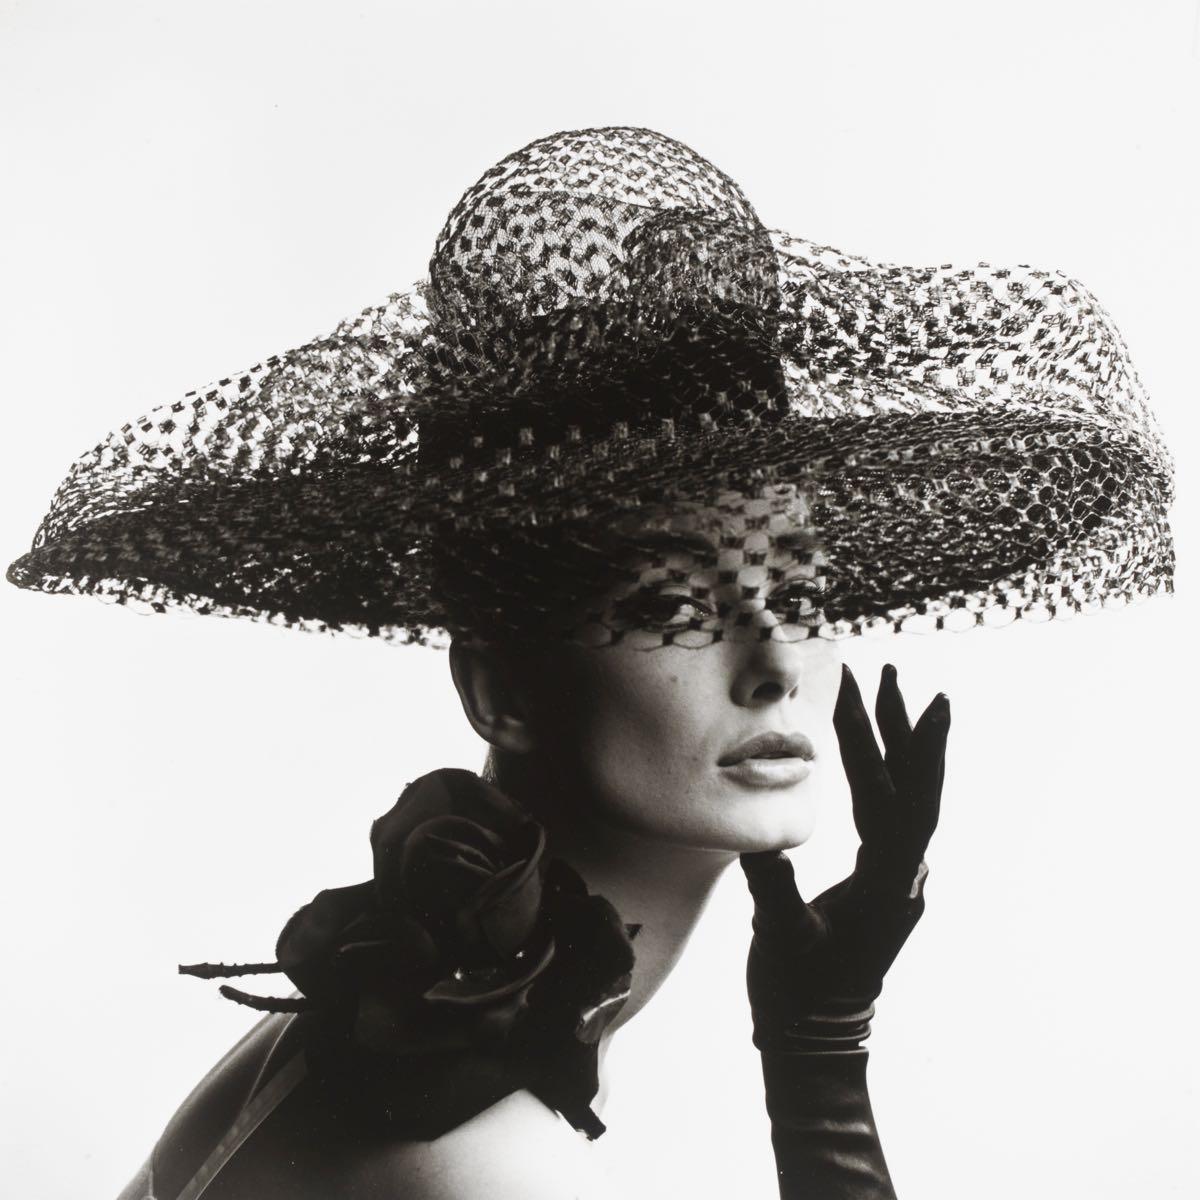 John French Portrait Photograph - ' Tania Mallet In A Madame Paulette Hat ' 1963 - Victoria and Albert Museum